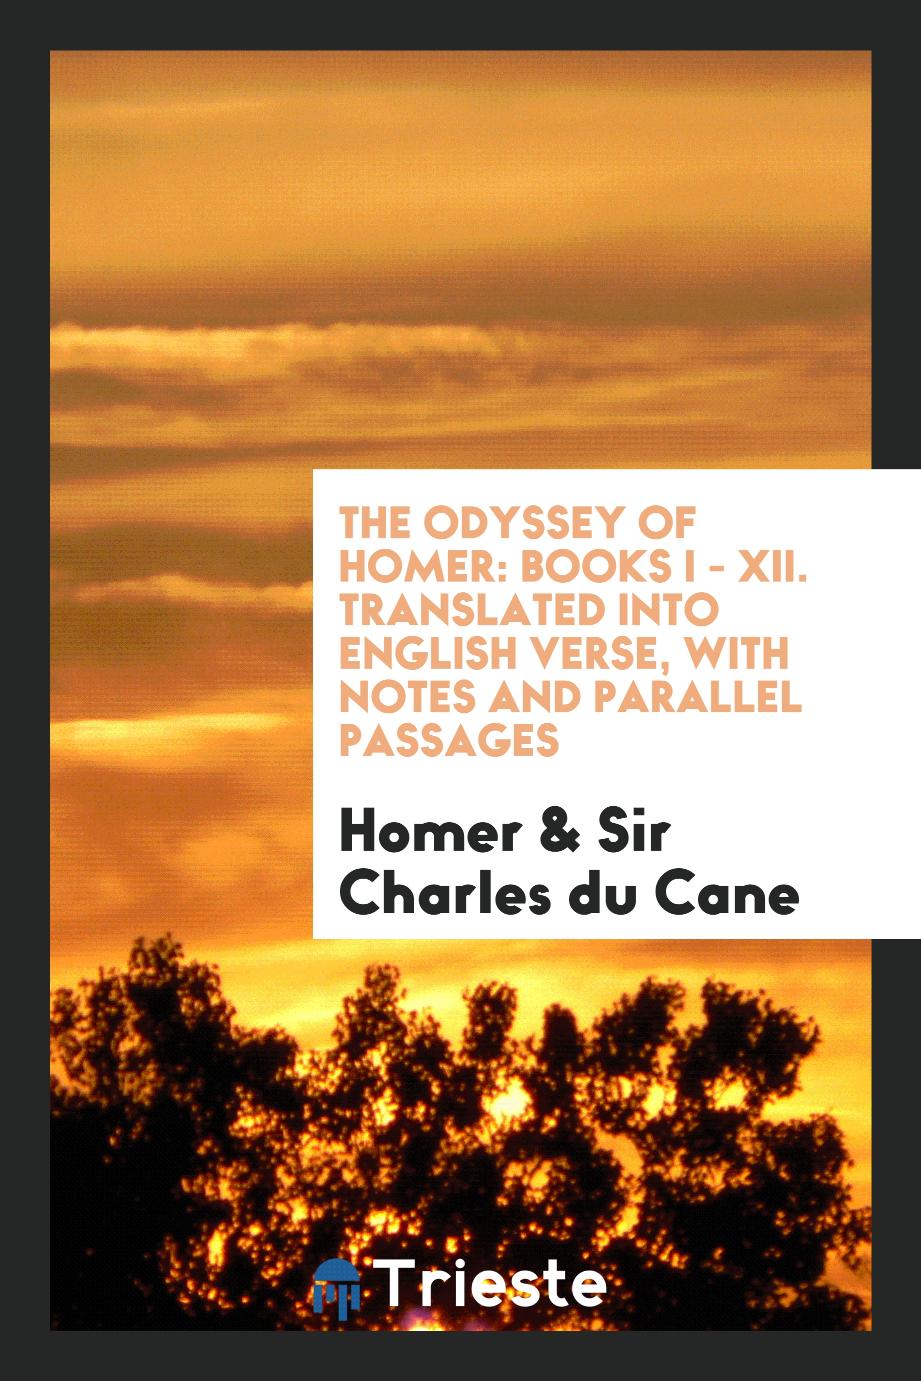 The Odyssey of Homer: Books I - XII. Translated into English Verse, with Notes and Parallel Passages